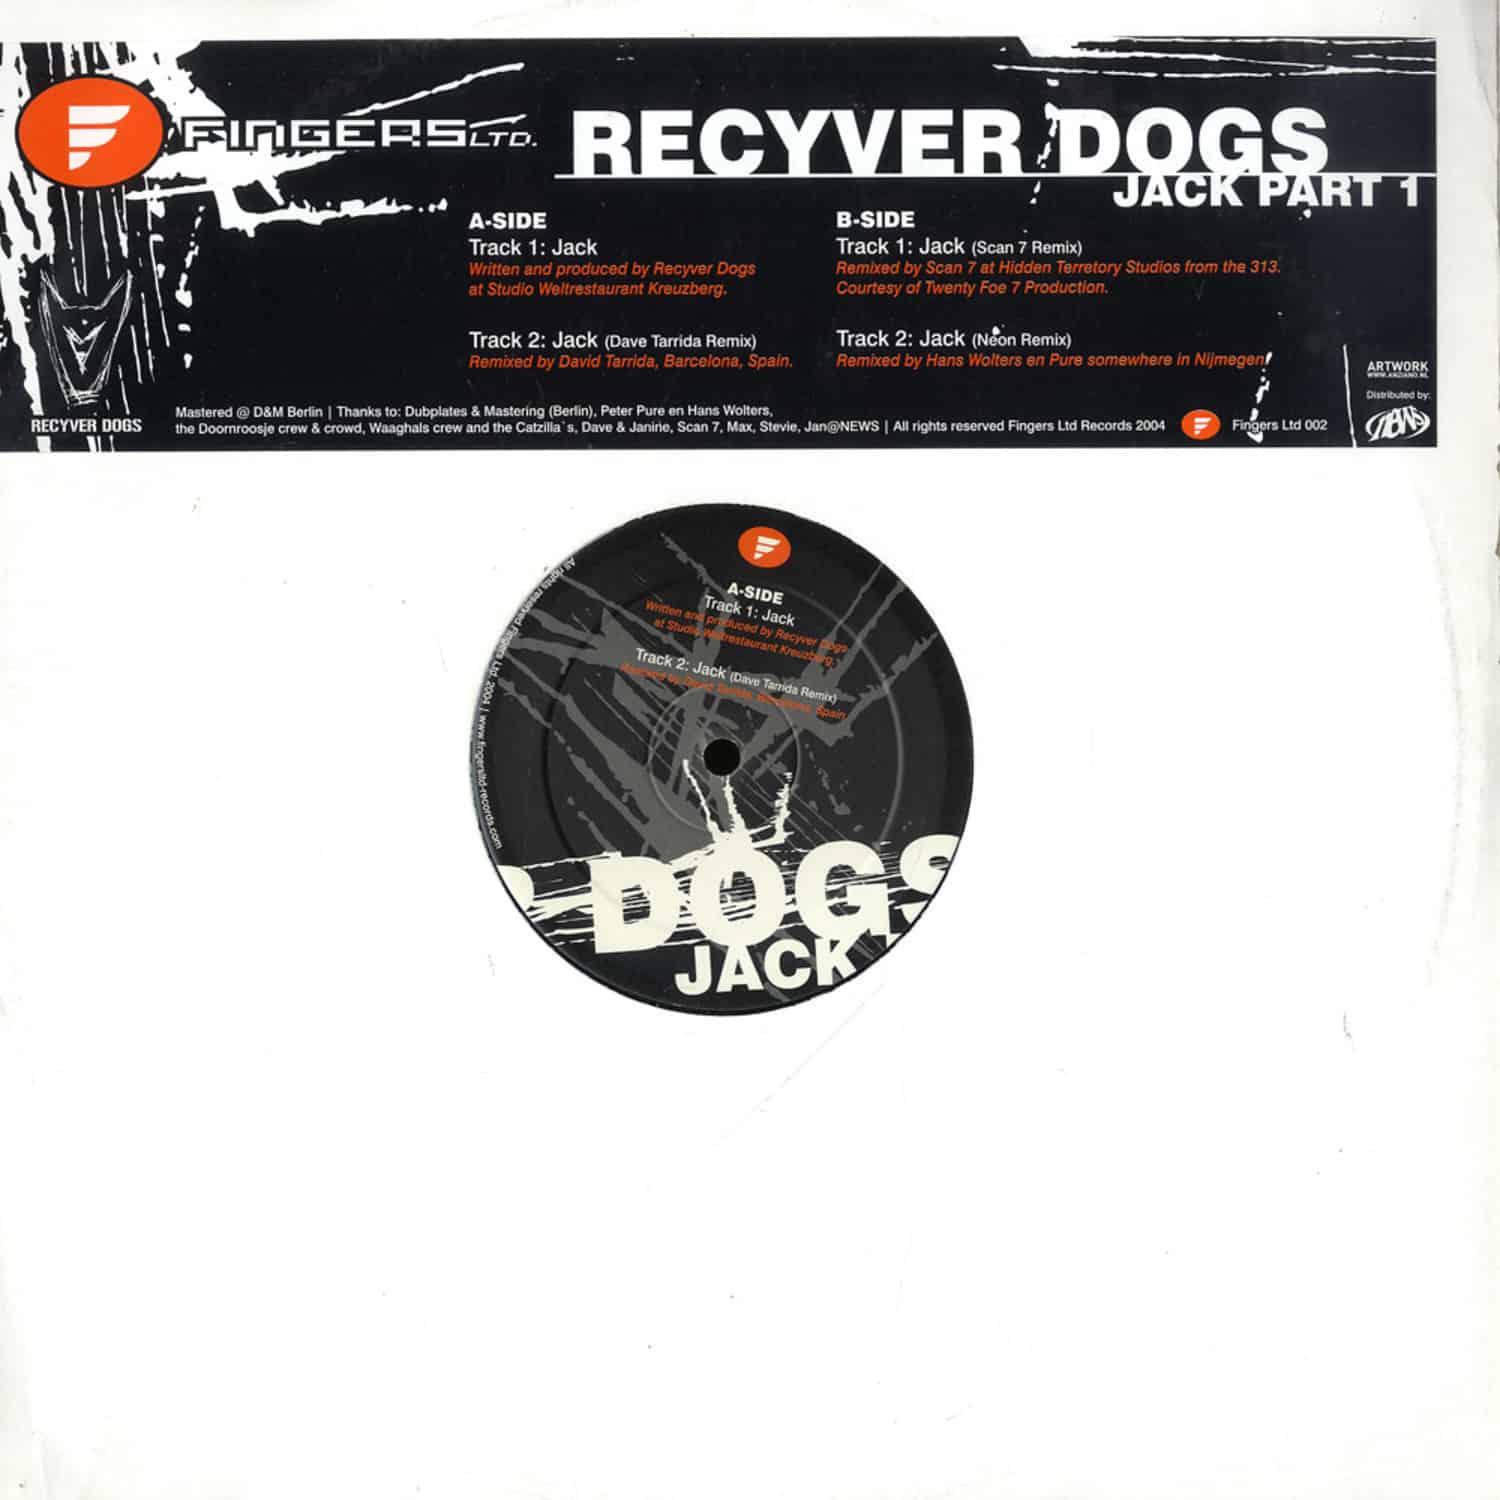 Recyver Dogs - JACK PART 1